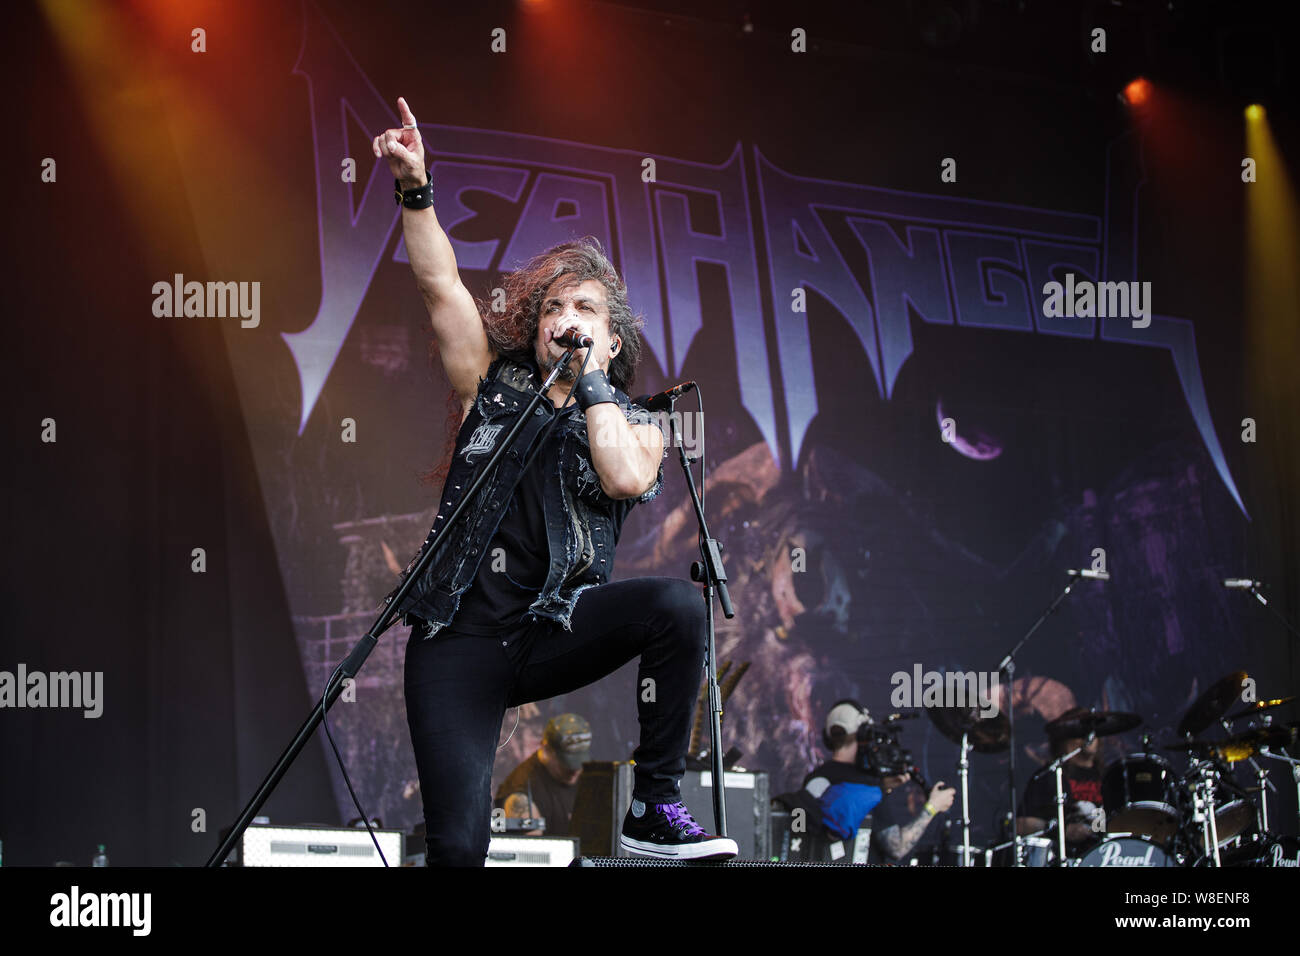 Death Angel perform live on stage at Bloodstock Open Air Festival, UK, 9th Aug, 2019. Stock Photo